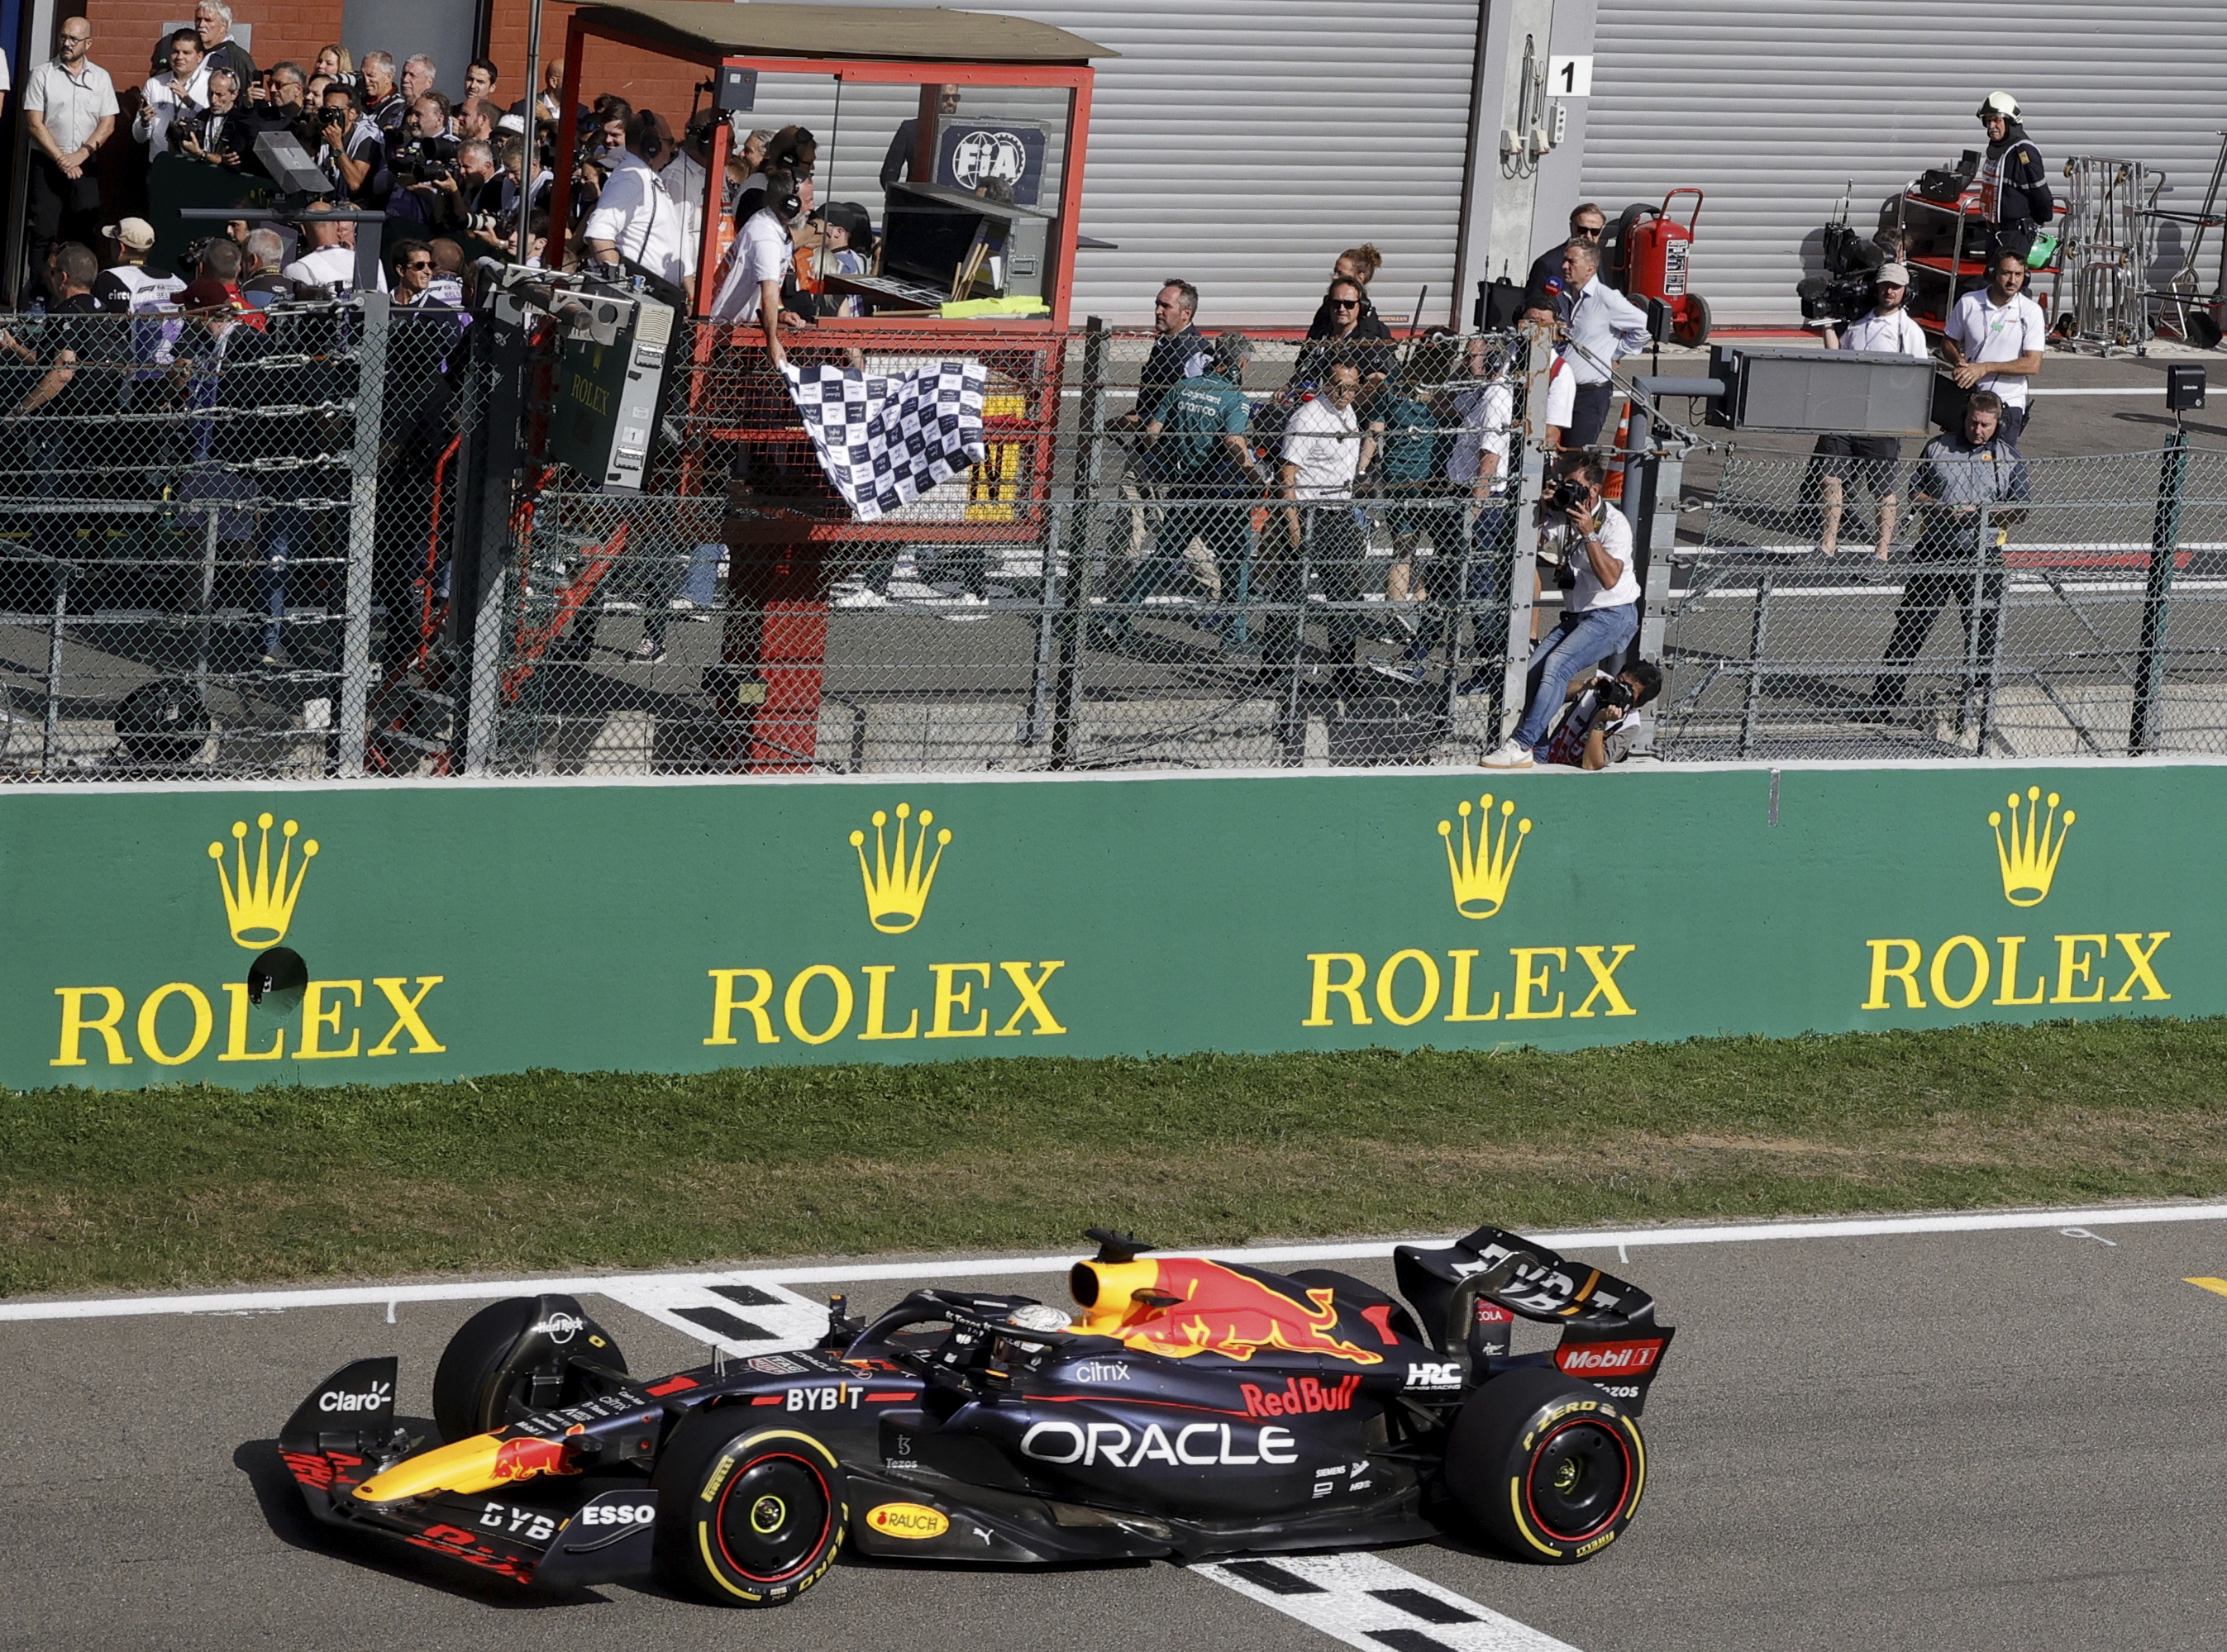 How to Watch the Dutch Grand Prix - Formula 1 Channel, Stream, Preview